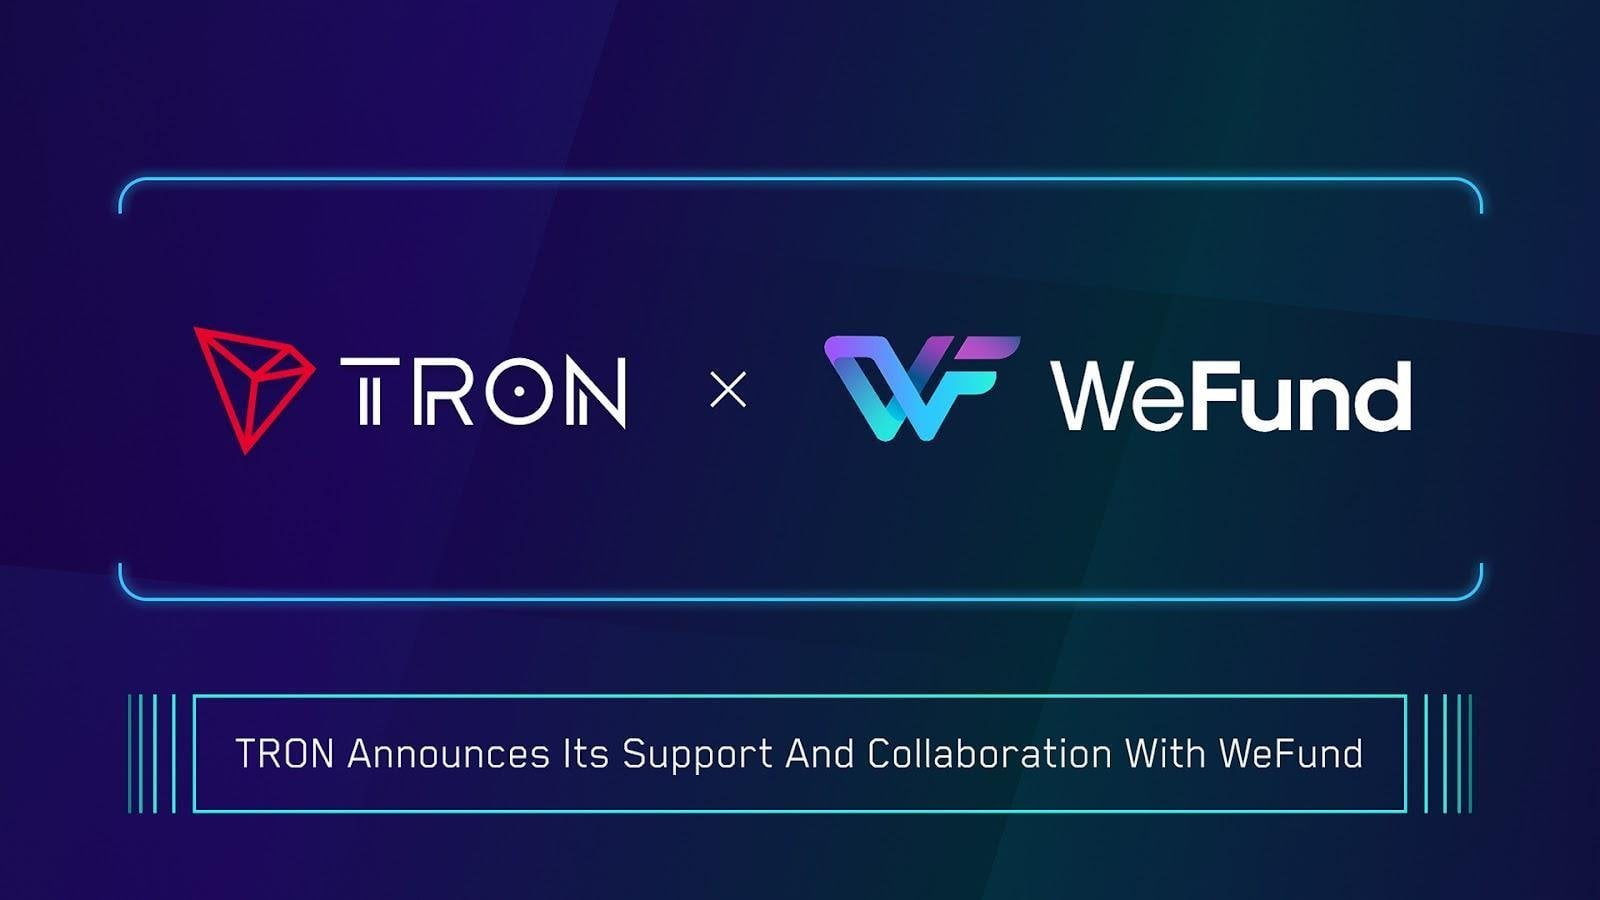 TRON Announces its Support and Collaboration with WeFund 2